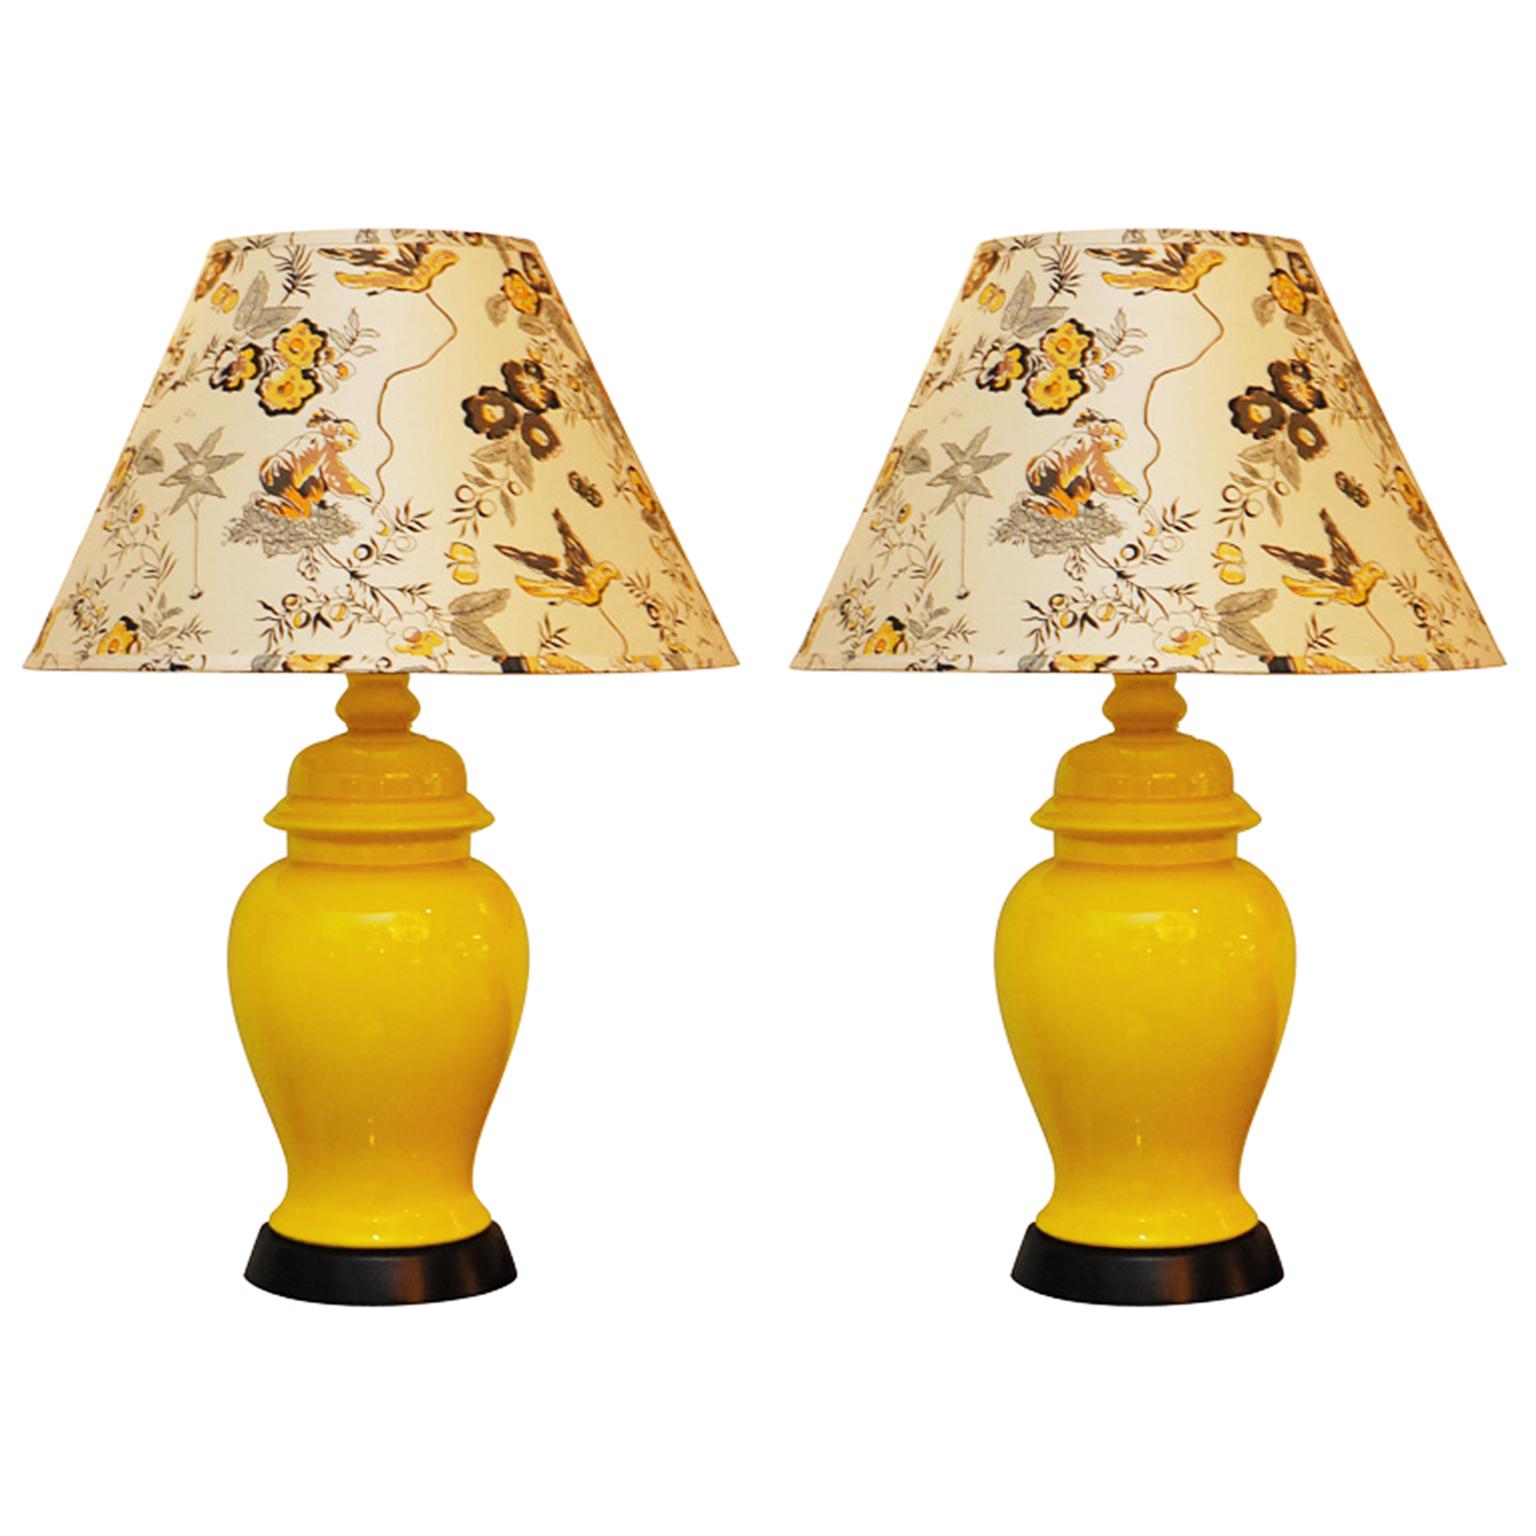 Pair of Midcentury Chinoiserie Jar Table Lamps, France, 1960s